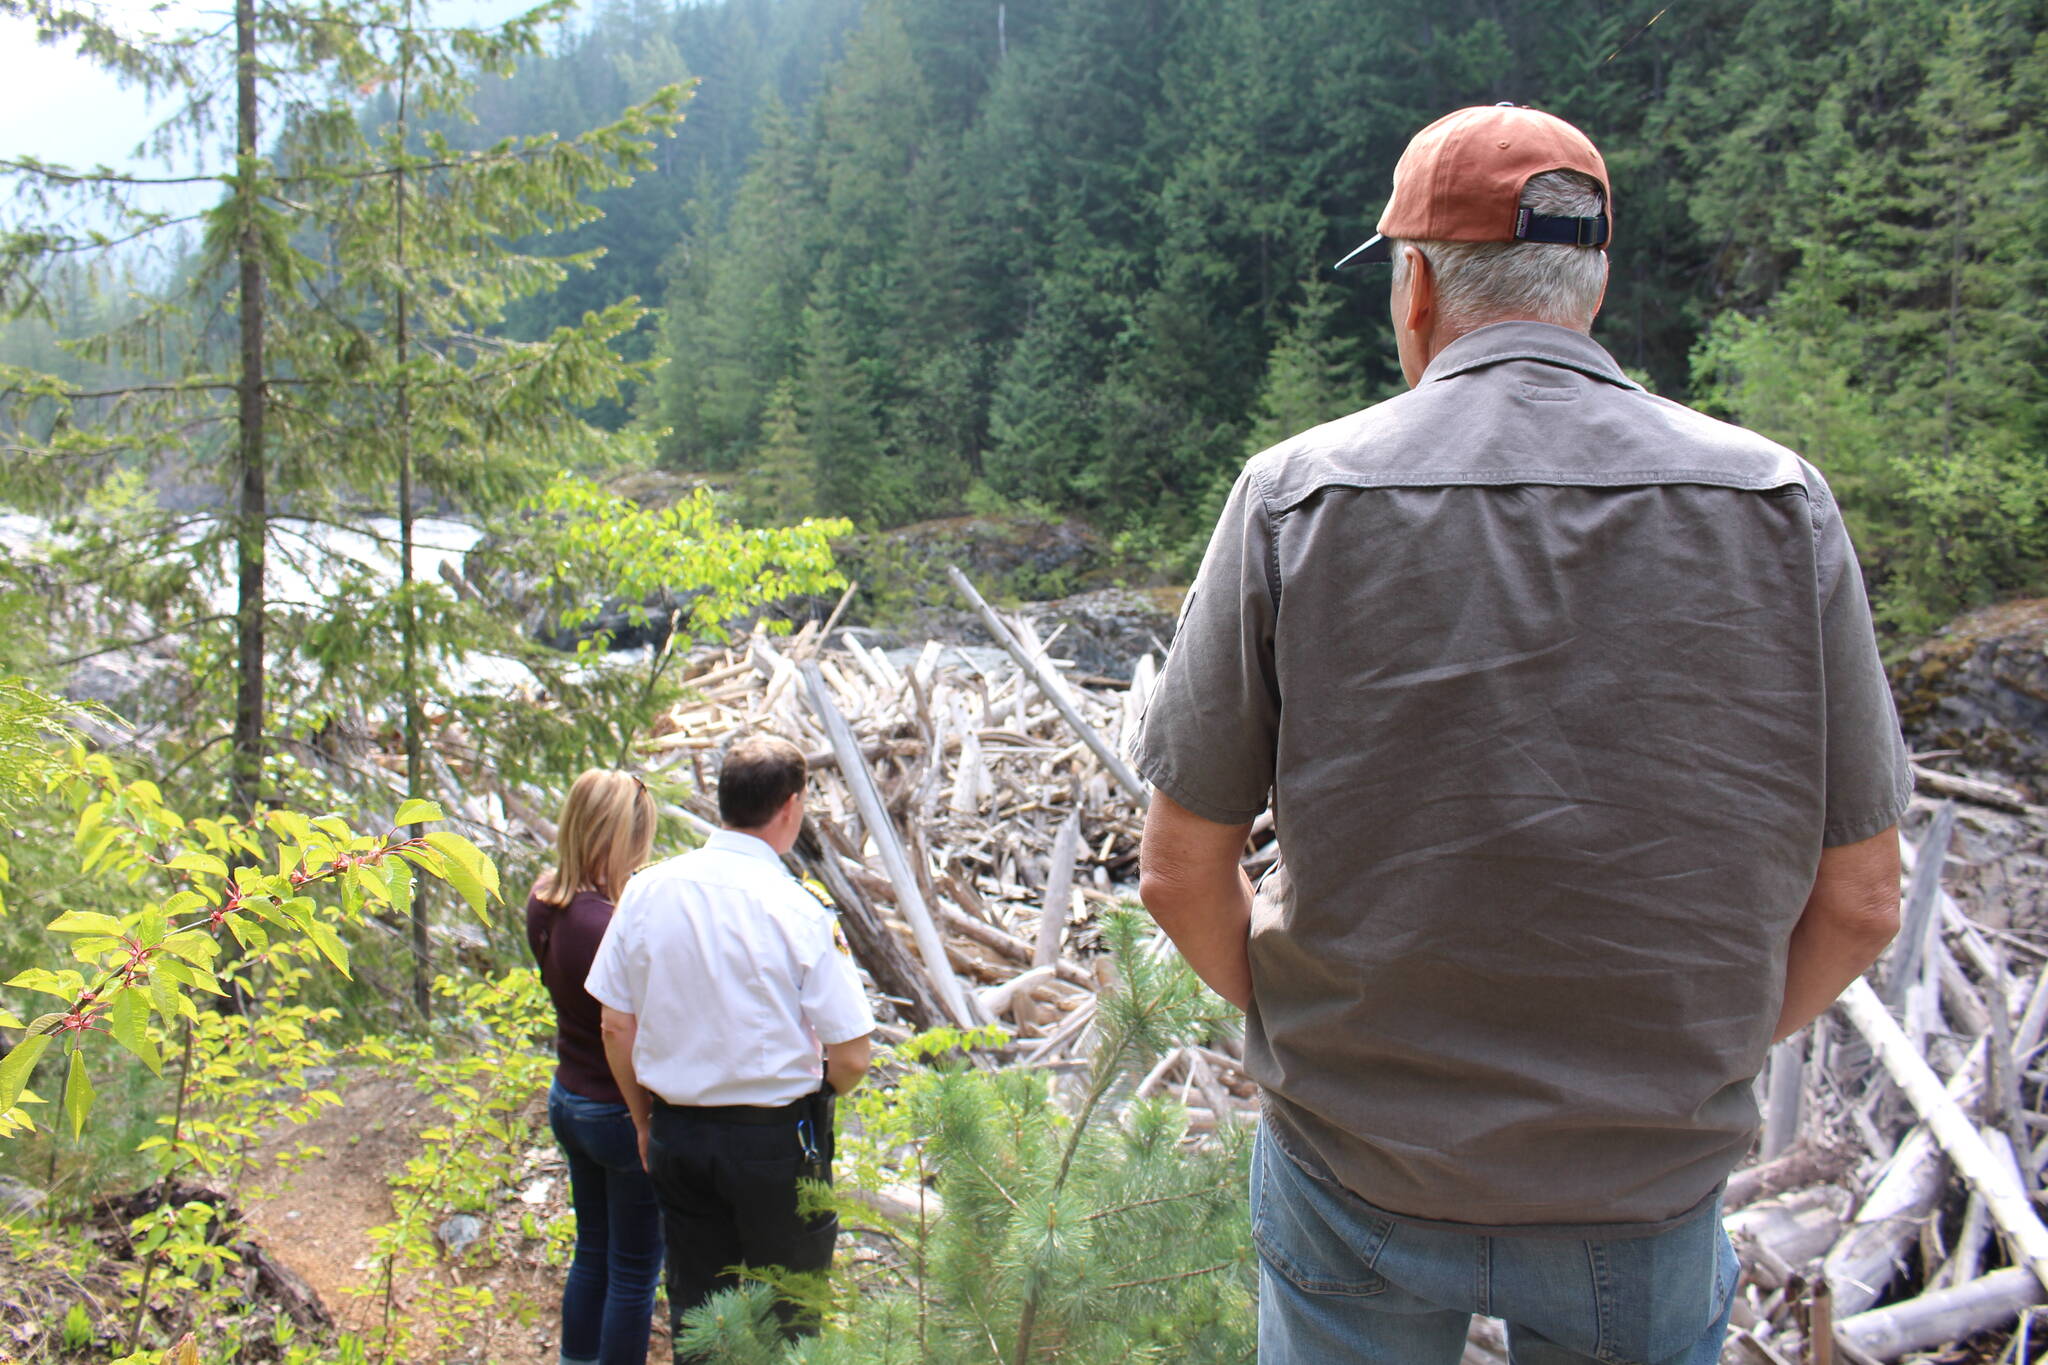 The Box Canyon log jam formed nearly a decade ago. (Zachary Delaney/Revelstoke Review)Steven DeRousie and Steve Black have worked to try to get the log jam removed for the past three years. (Zachary Delaney/Revelstoke Review)